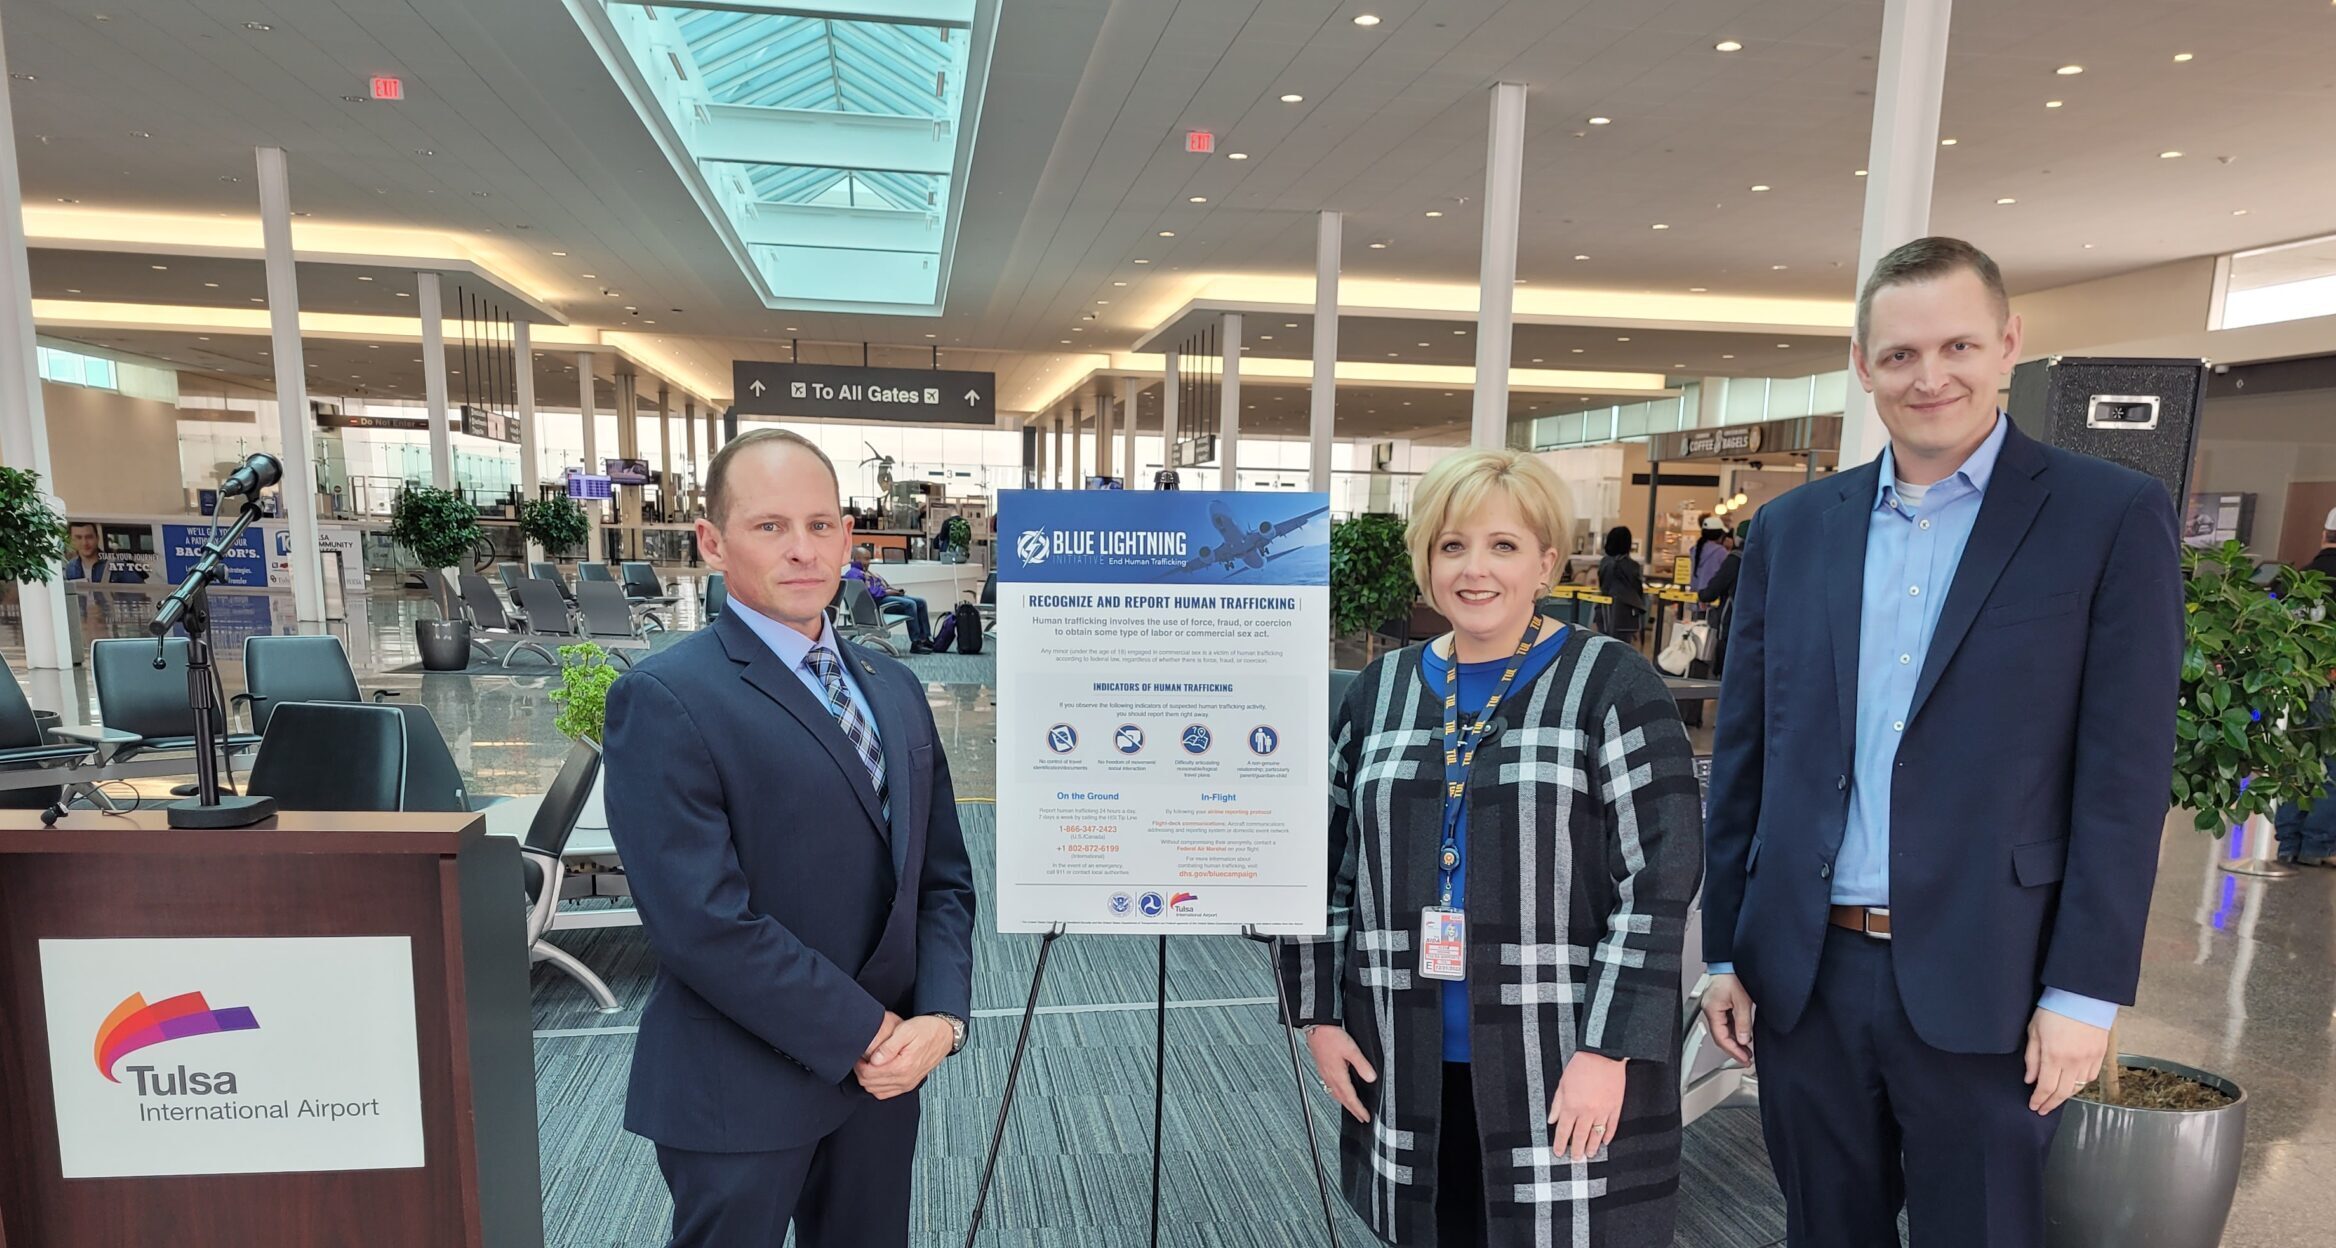 Tulsa International Airport Joins Blue Lightning  Initiative to Defend Against Human Trafficking